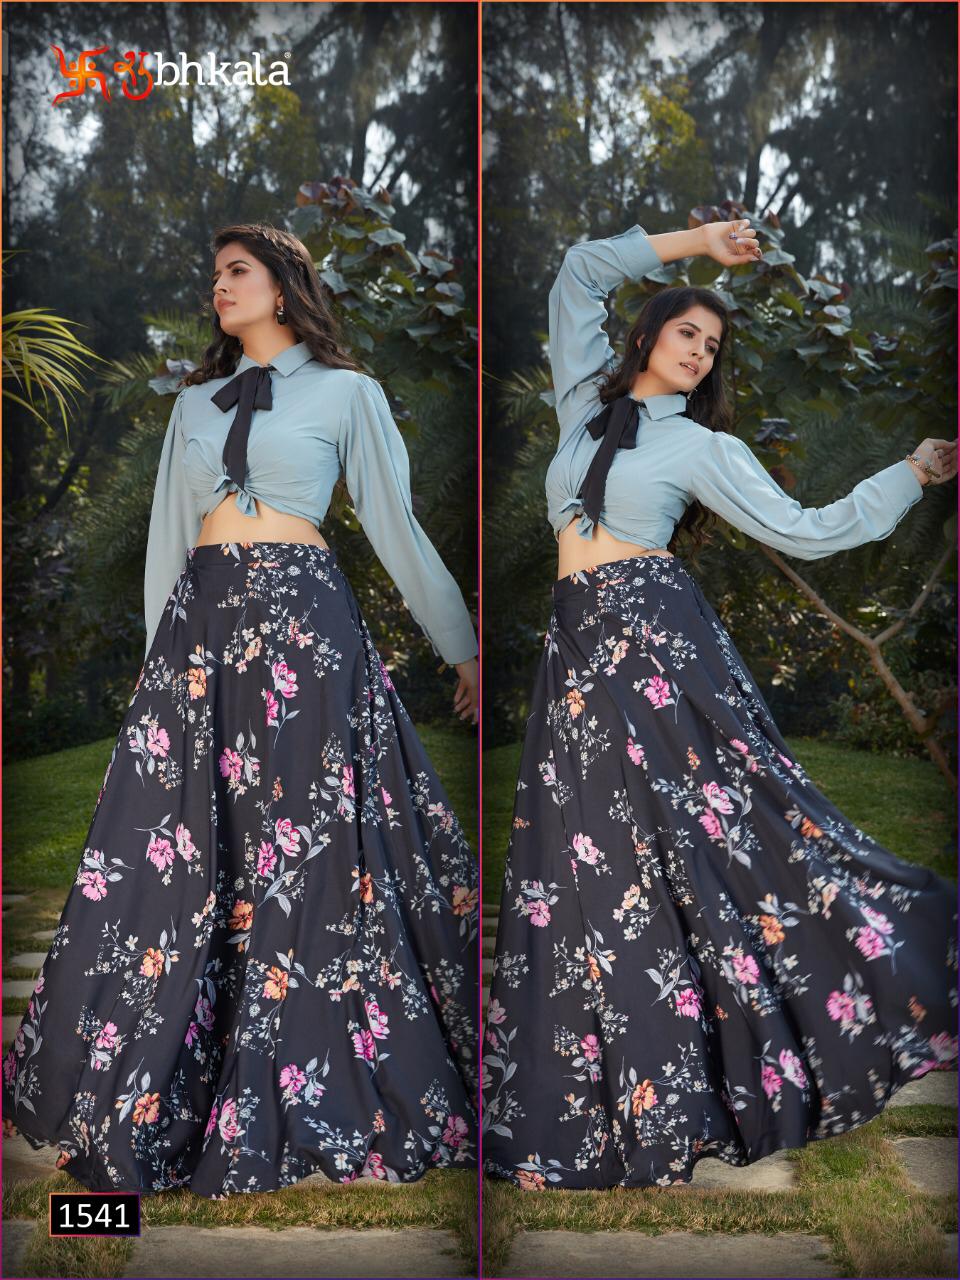 Subhkala Presents Frill And Flare Vol-3 Cotton With Georgette Crop-top Collection Designer Crop-top Collectio